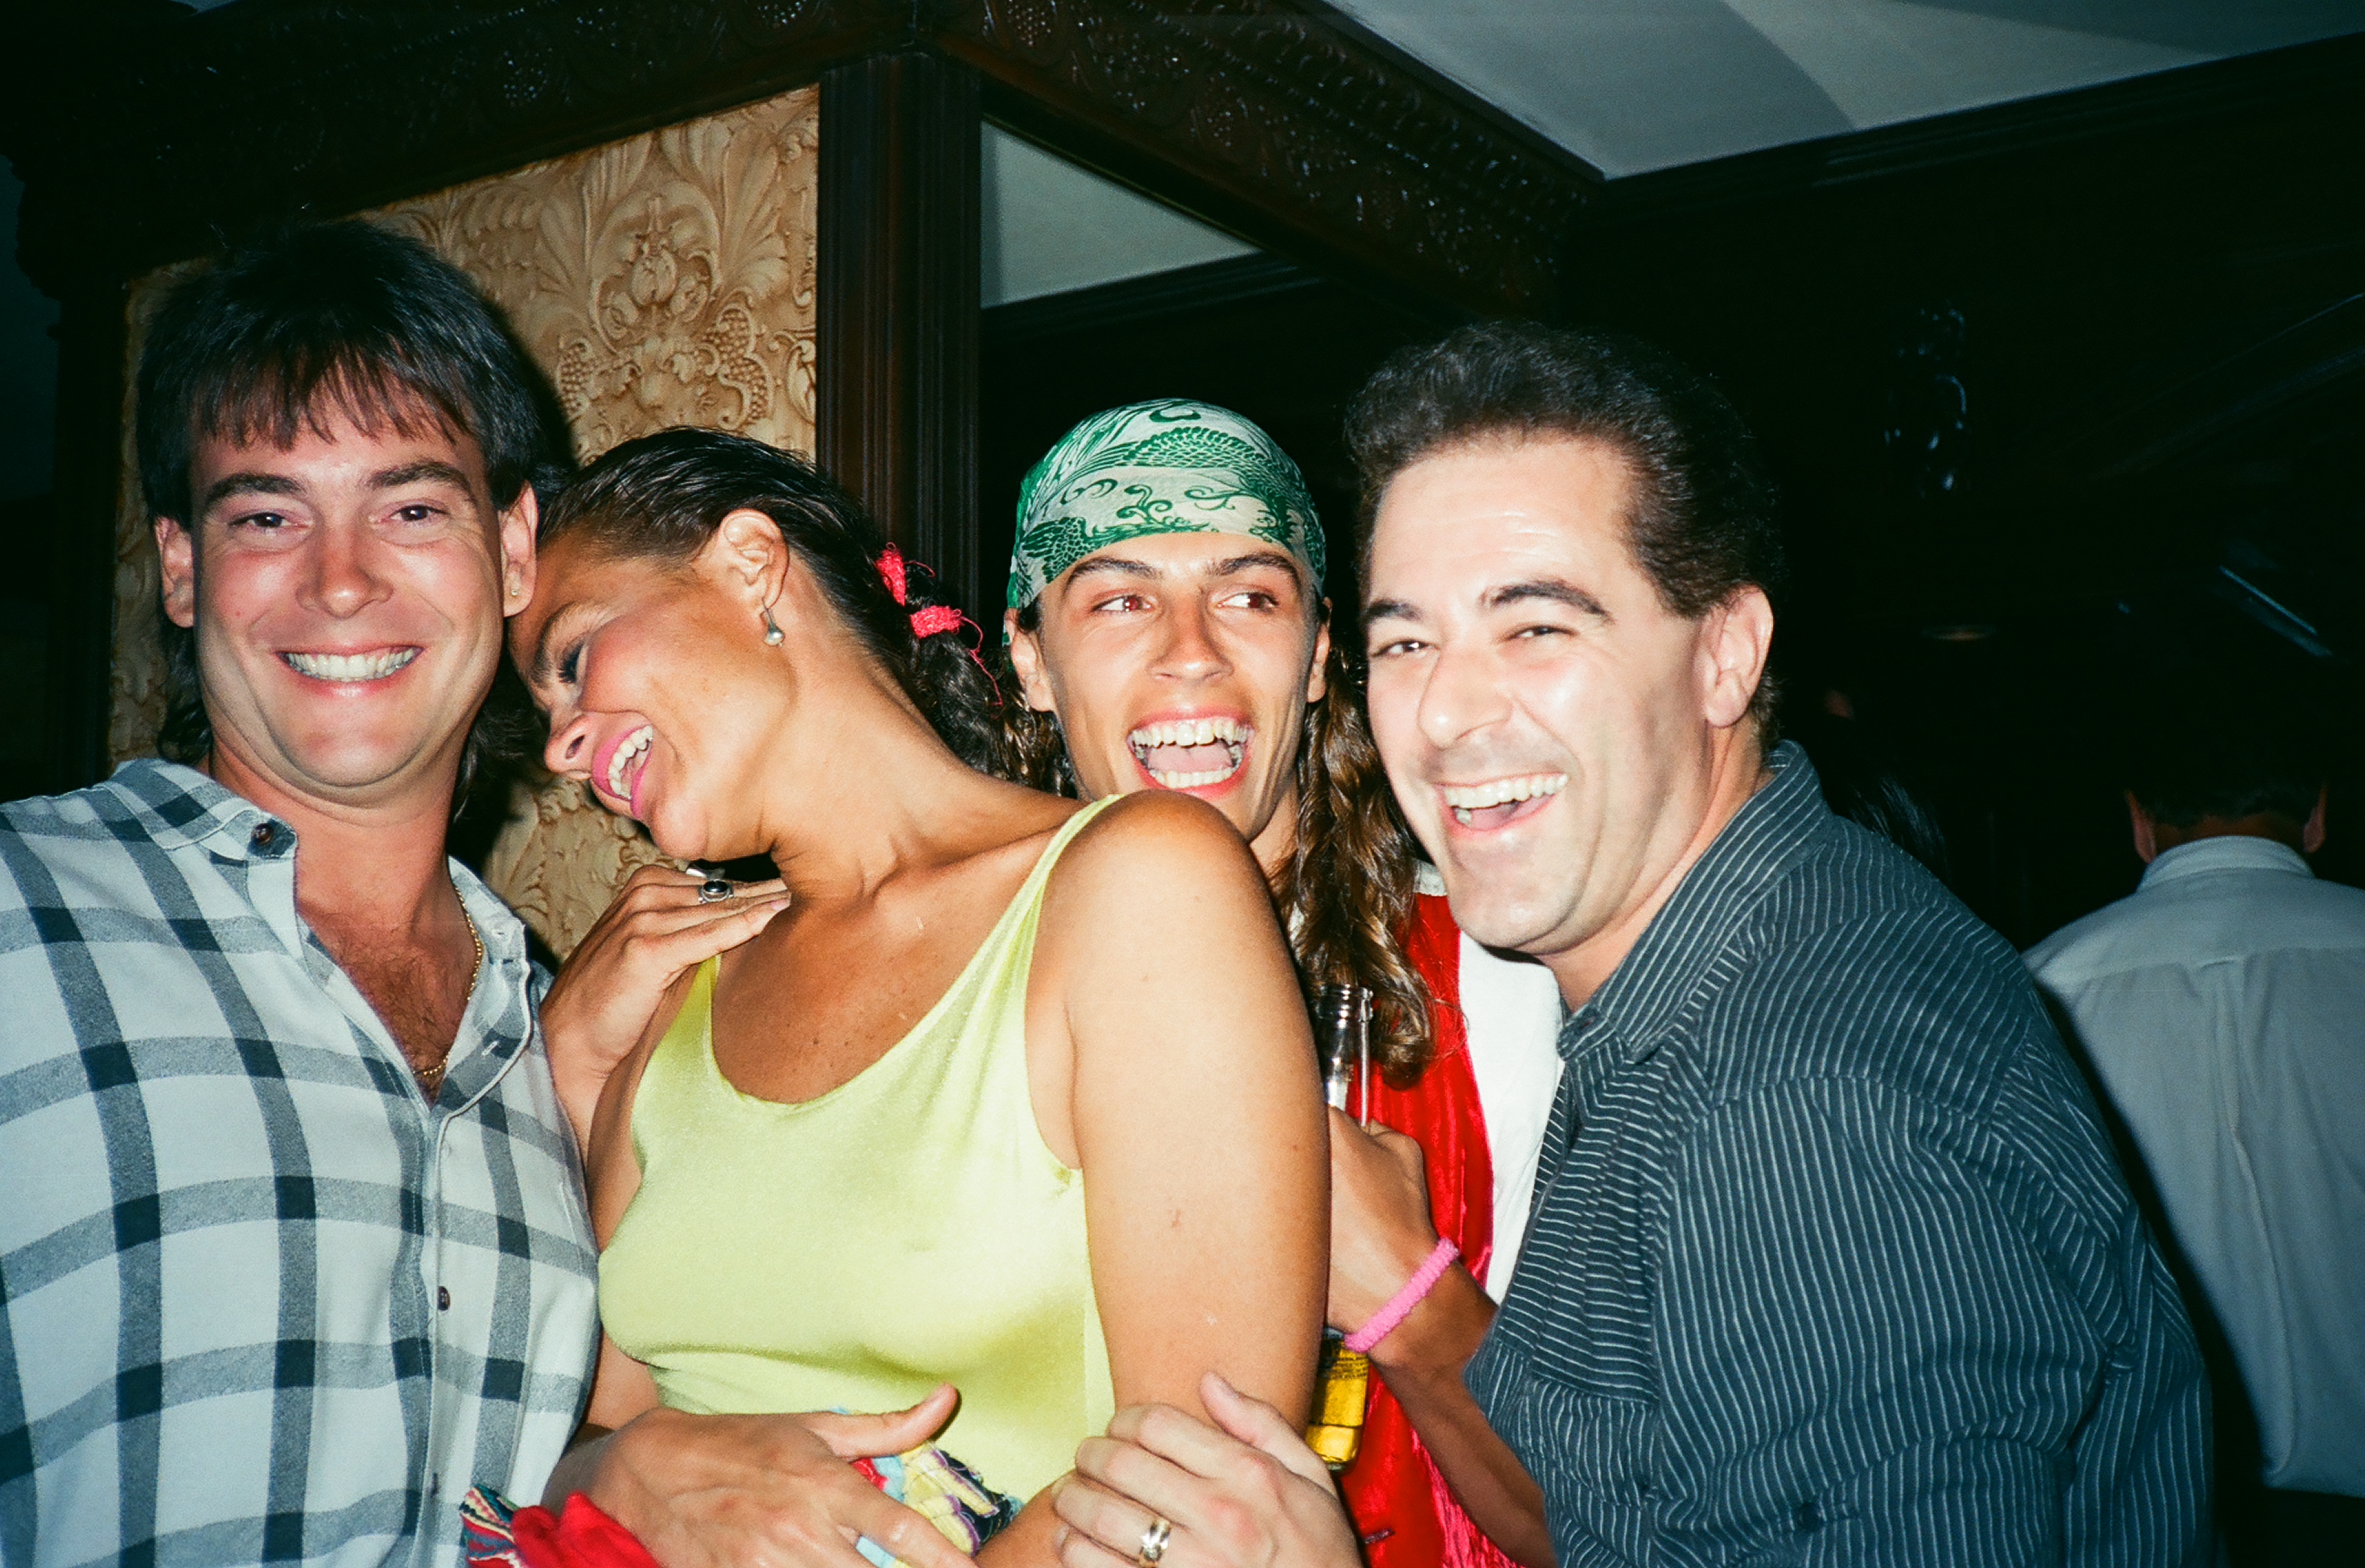 Arrive Alive 1990 Cast wrap party with native American actors in the film.